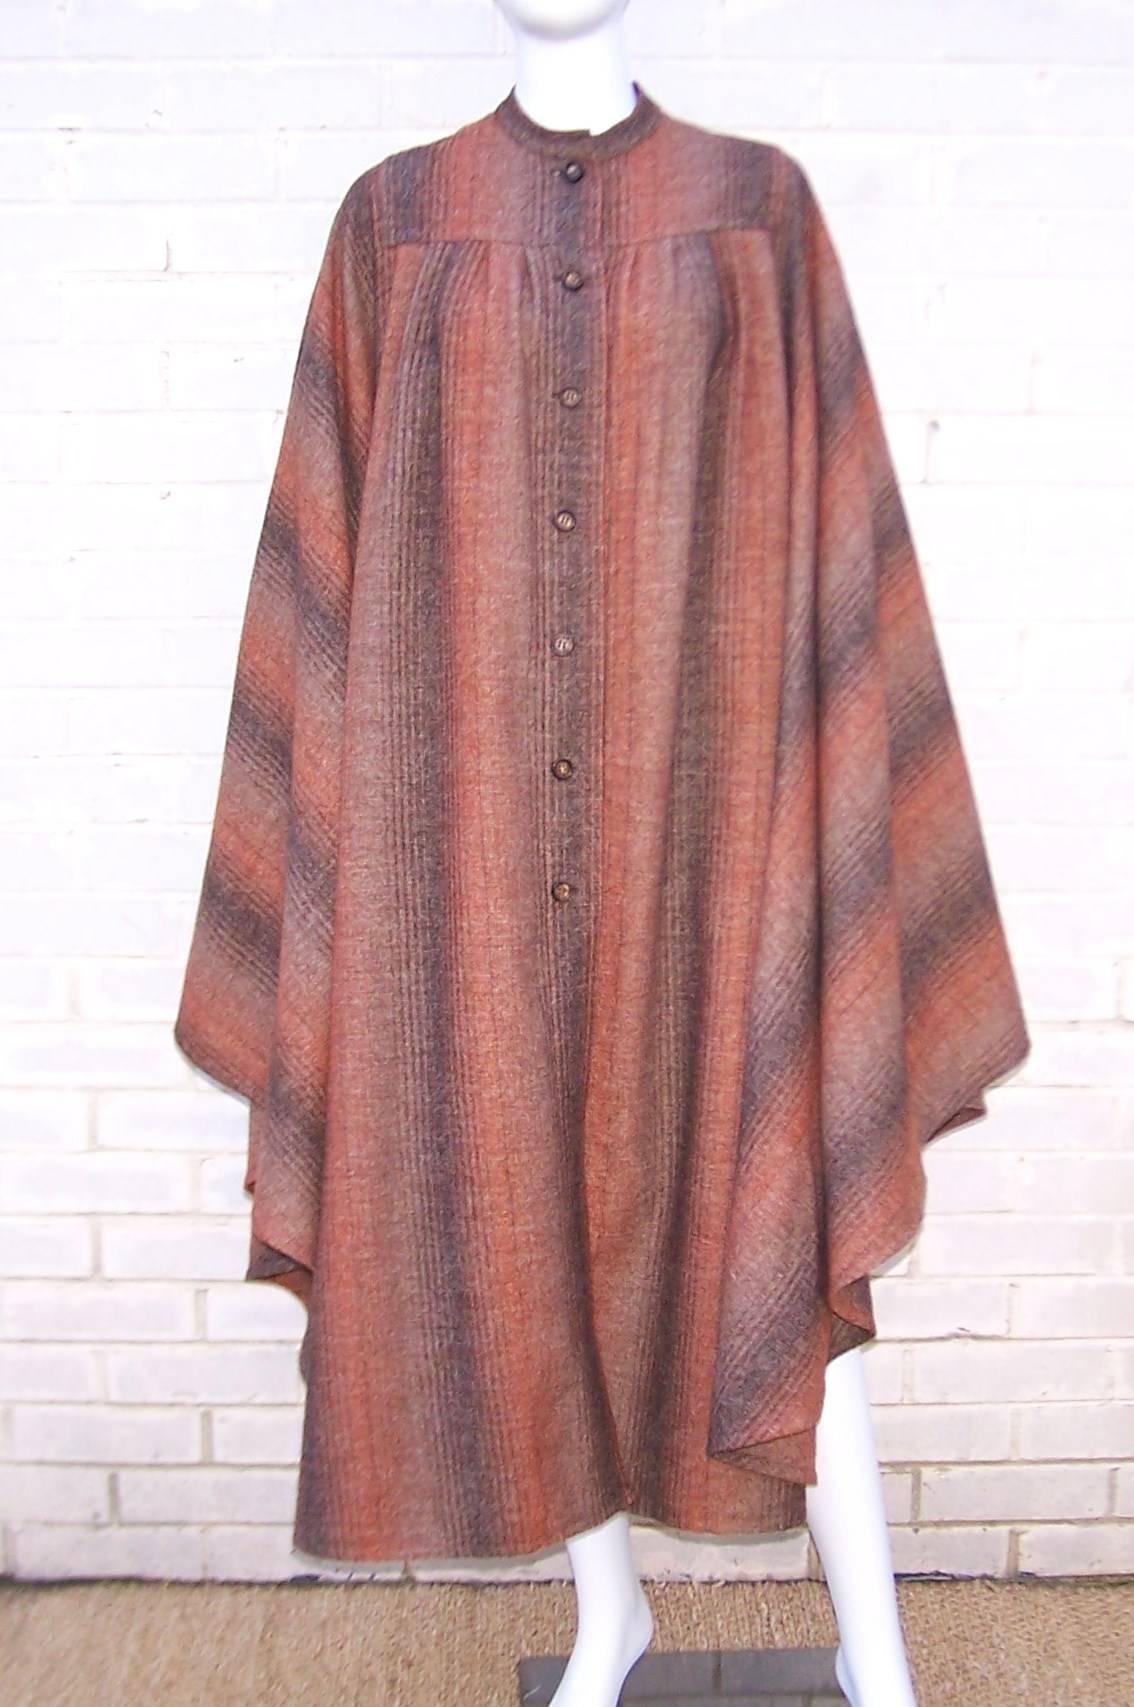 Fall is in the air and it's time to pull out a fashionable wrap.  We have the perfect thing!  This Lanvin wool cape is a classic brown autumnal tweed with the bohemian feel of the 1970's.  Unstructured and designed to billow dramatically with every